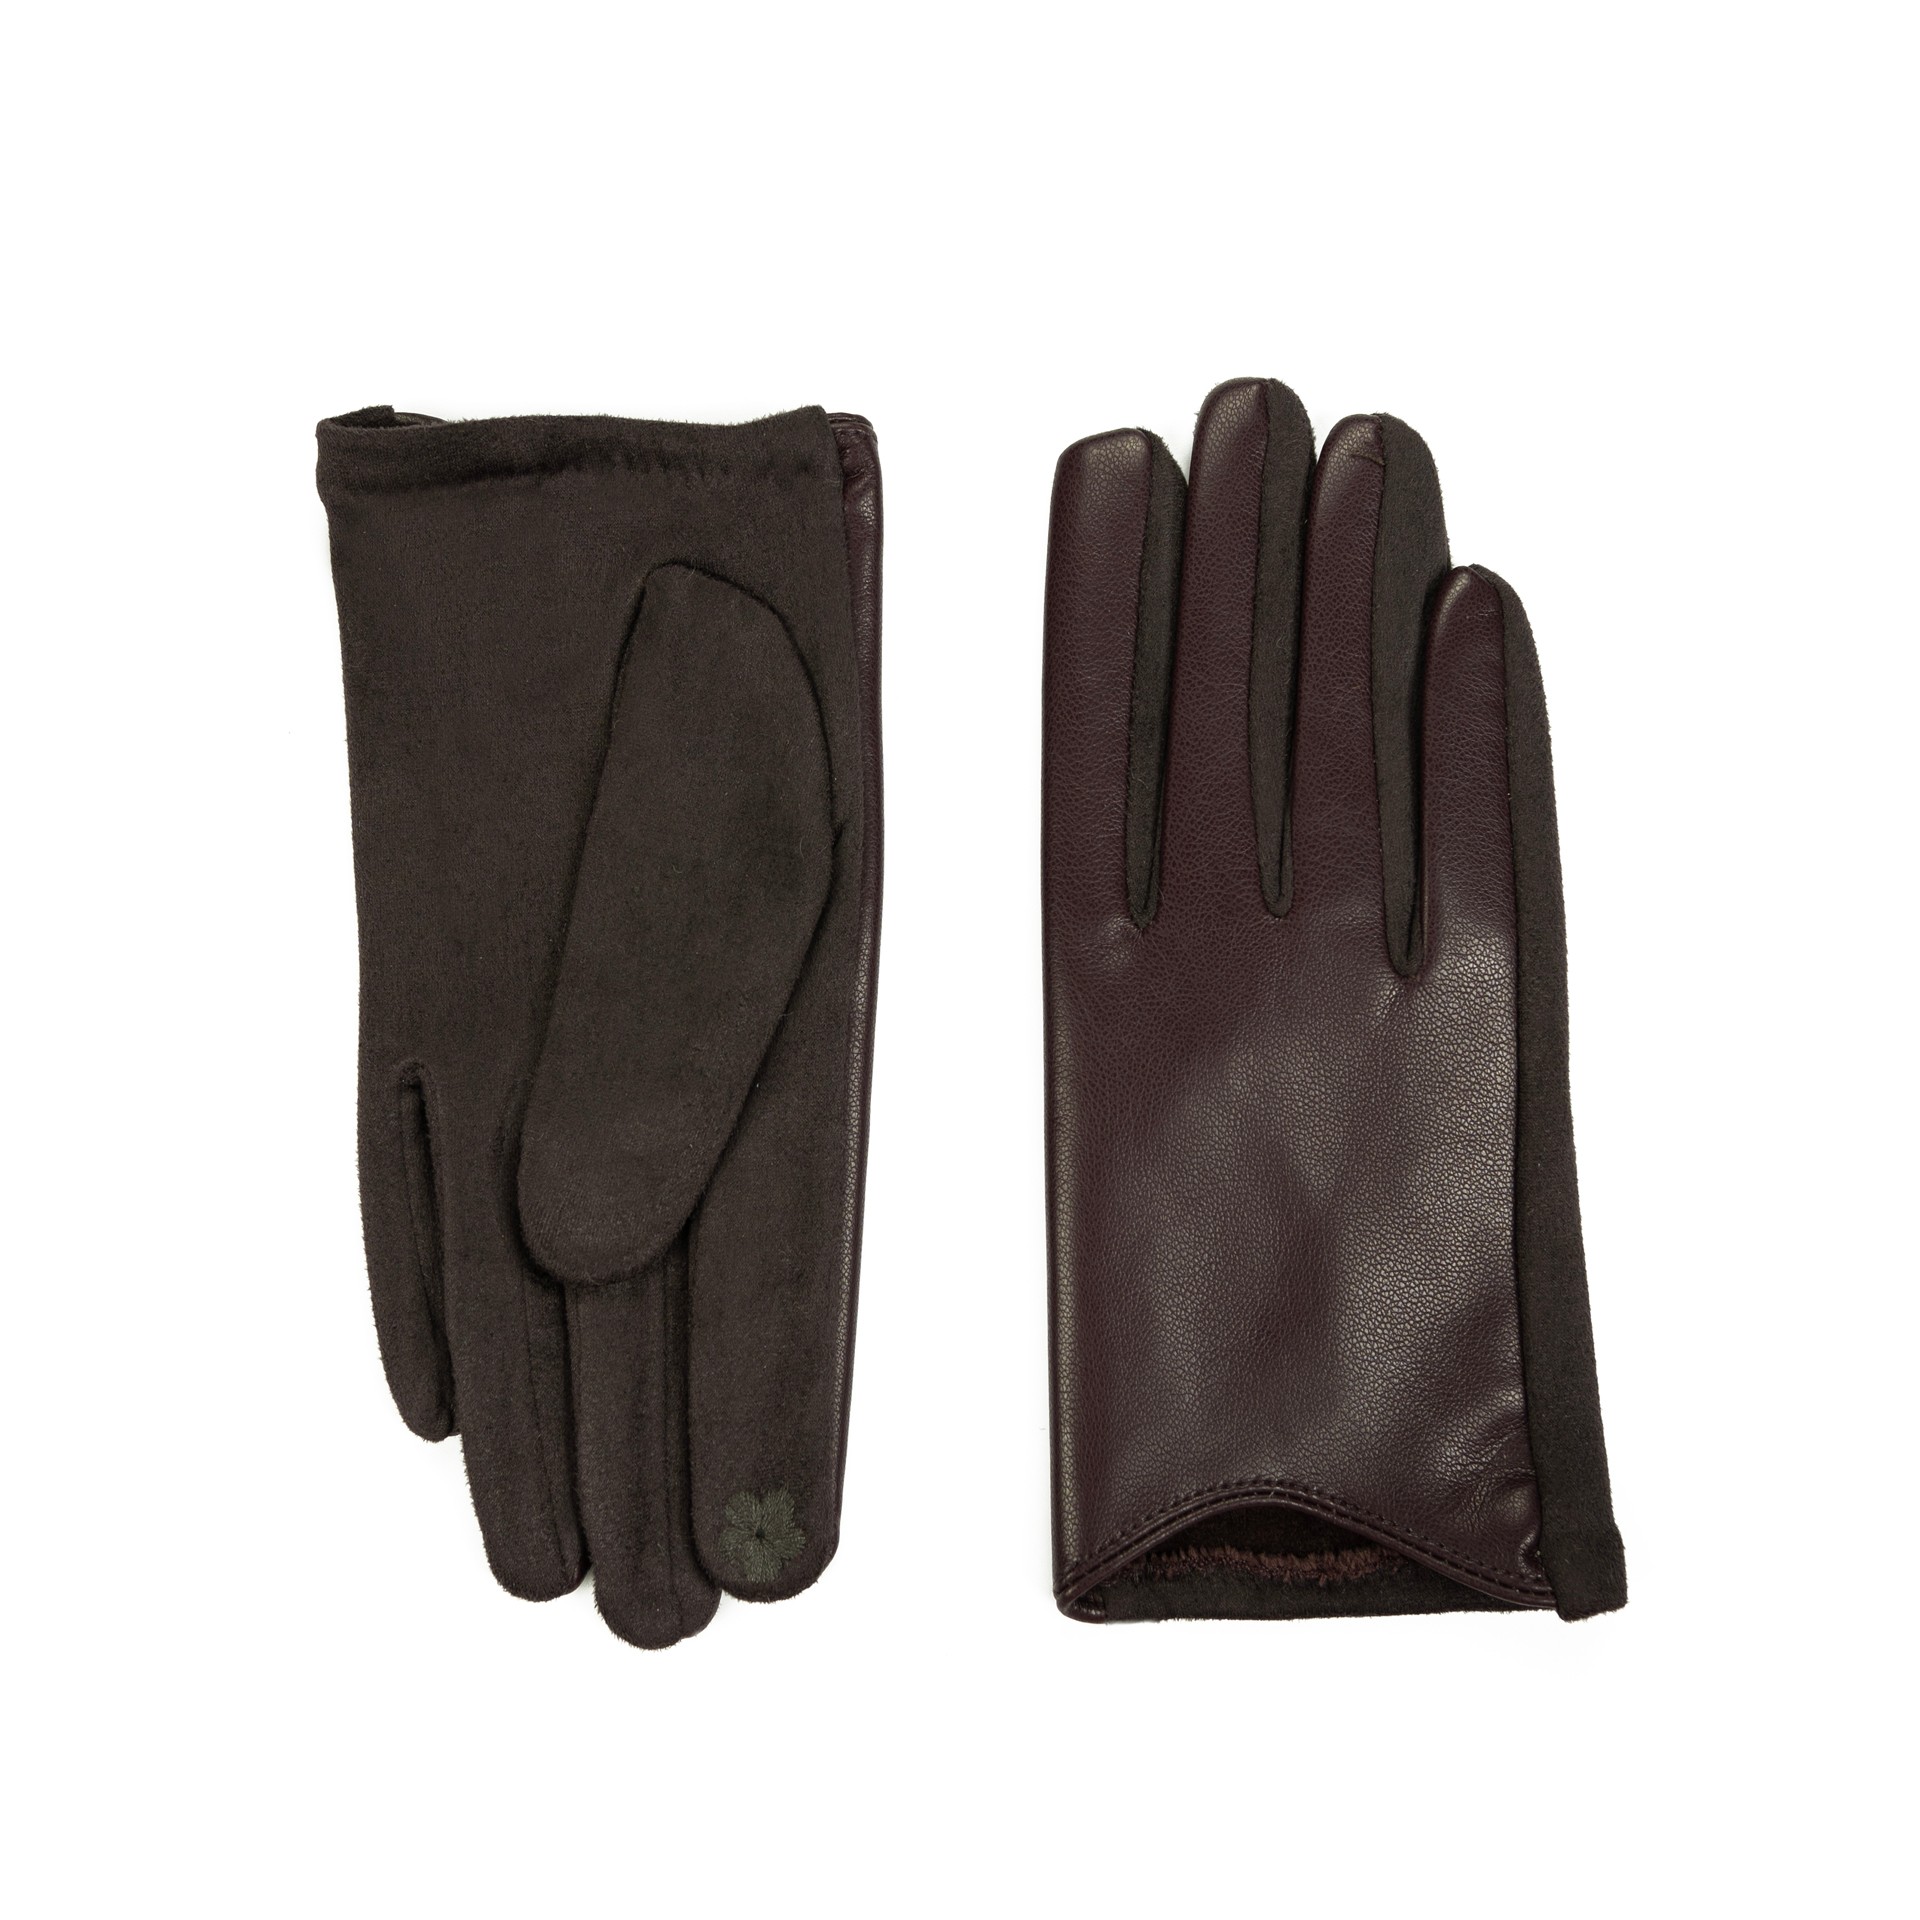 Art Of Polo Woman's Gloves Rk23392-9